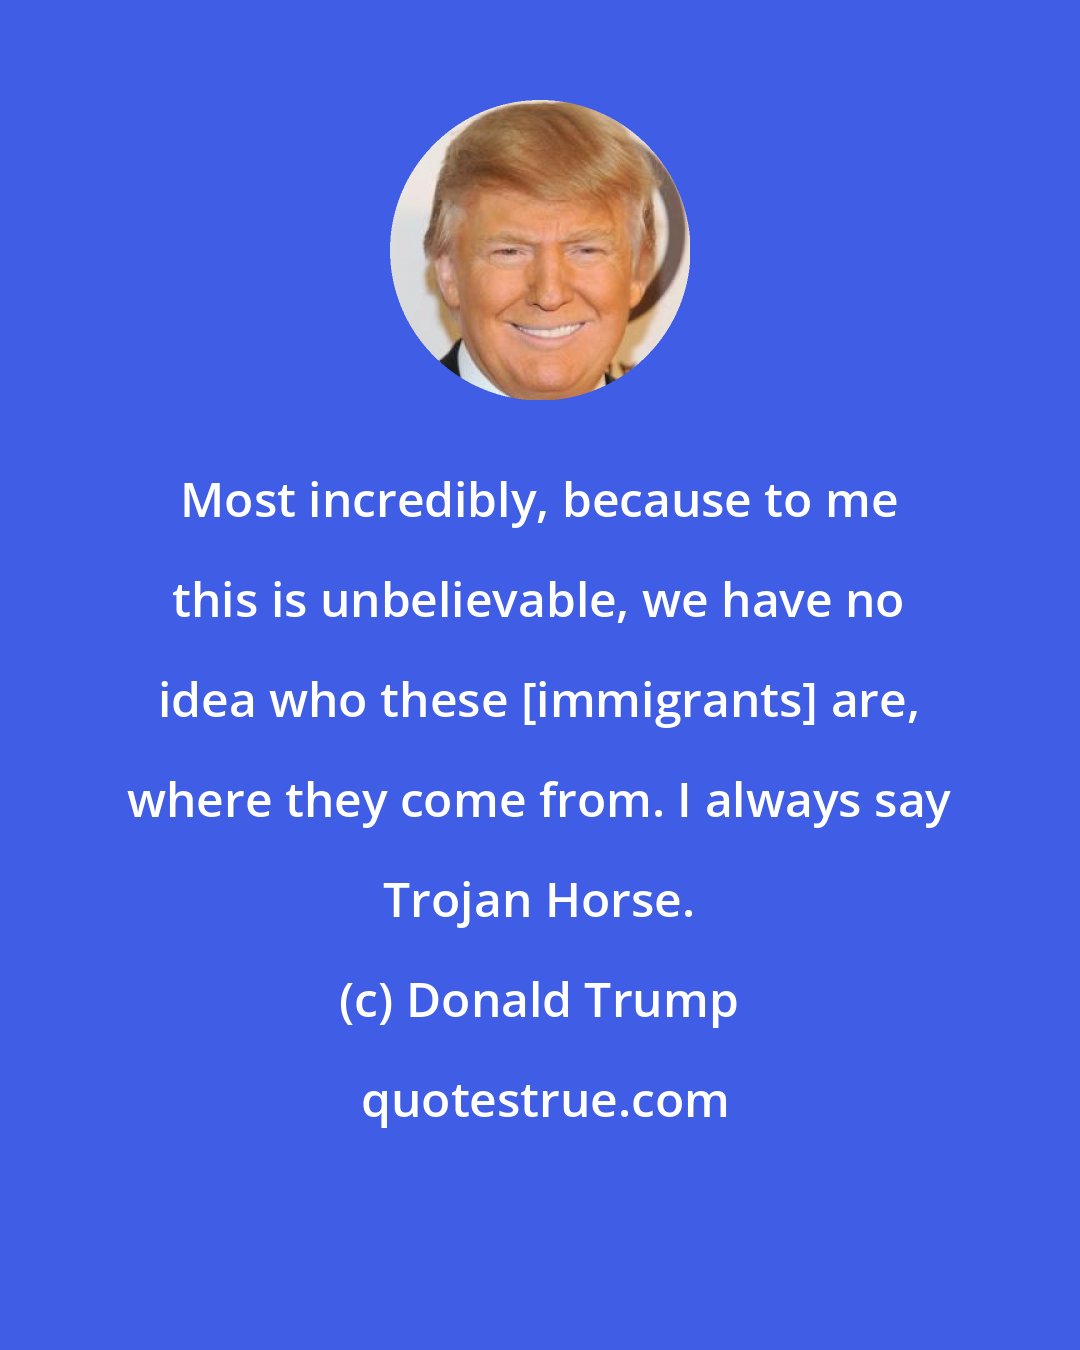 Donald Trump: Most incredibly, because to me this is unbelievable, we have no idea who these [immigrants] are, where they come from. I always say Trojan Horse.